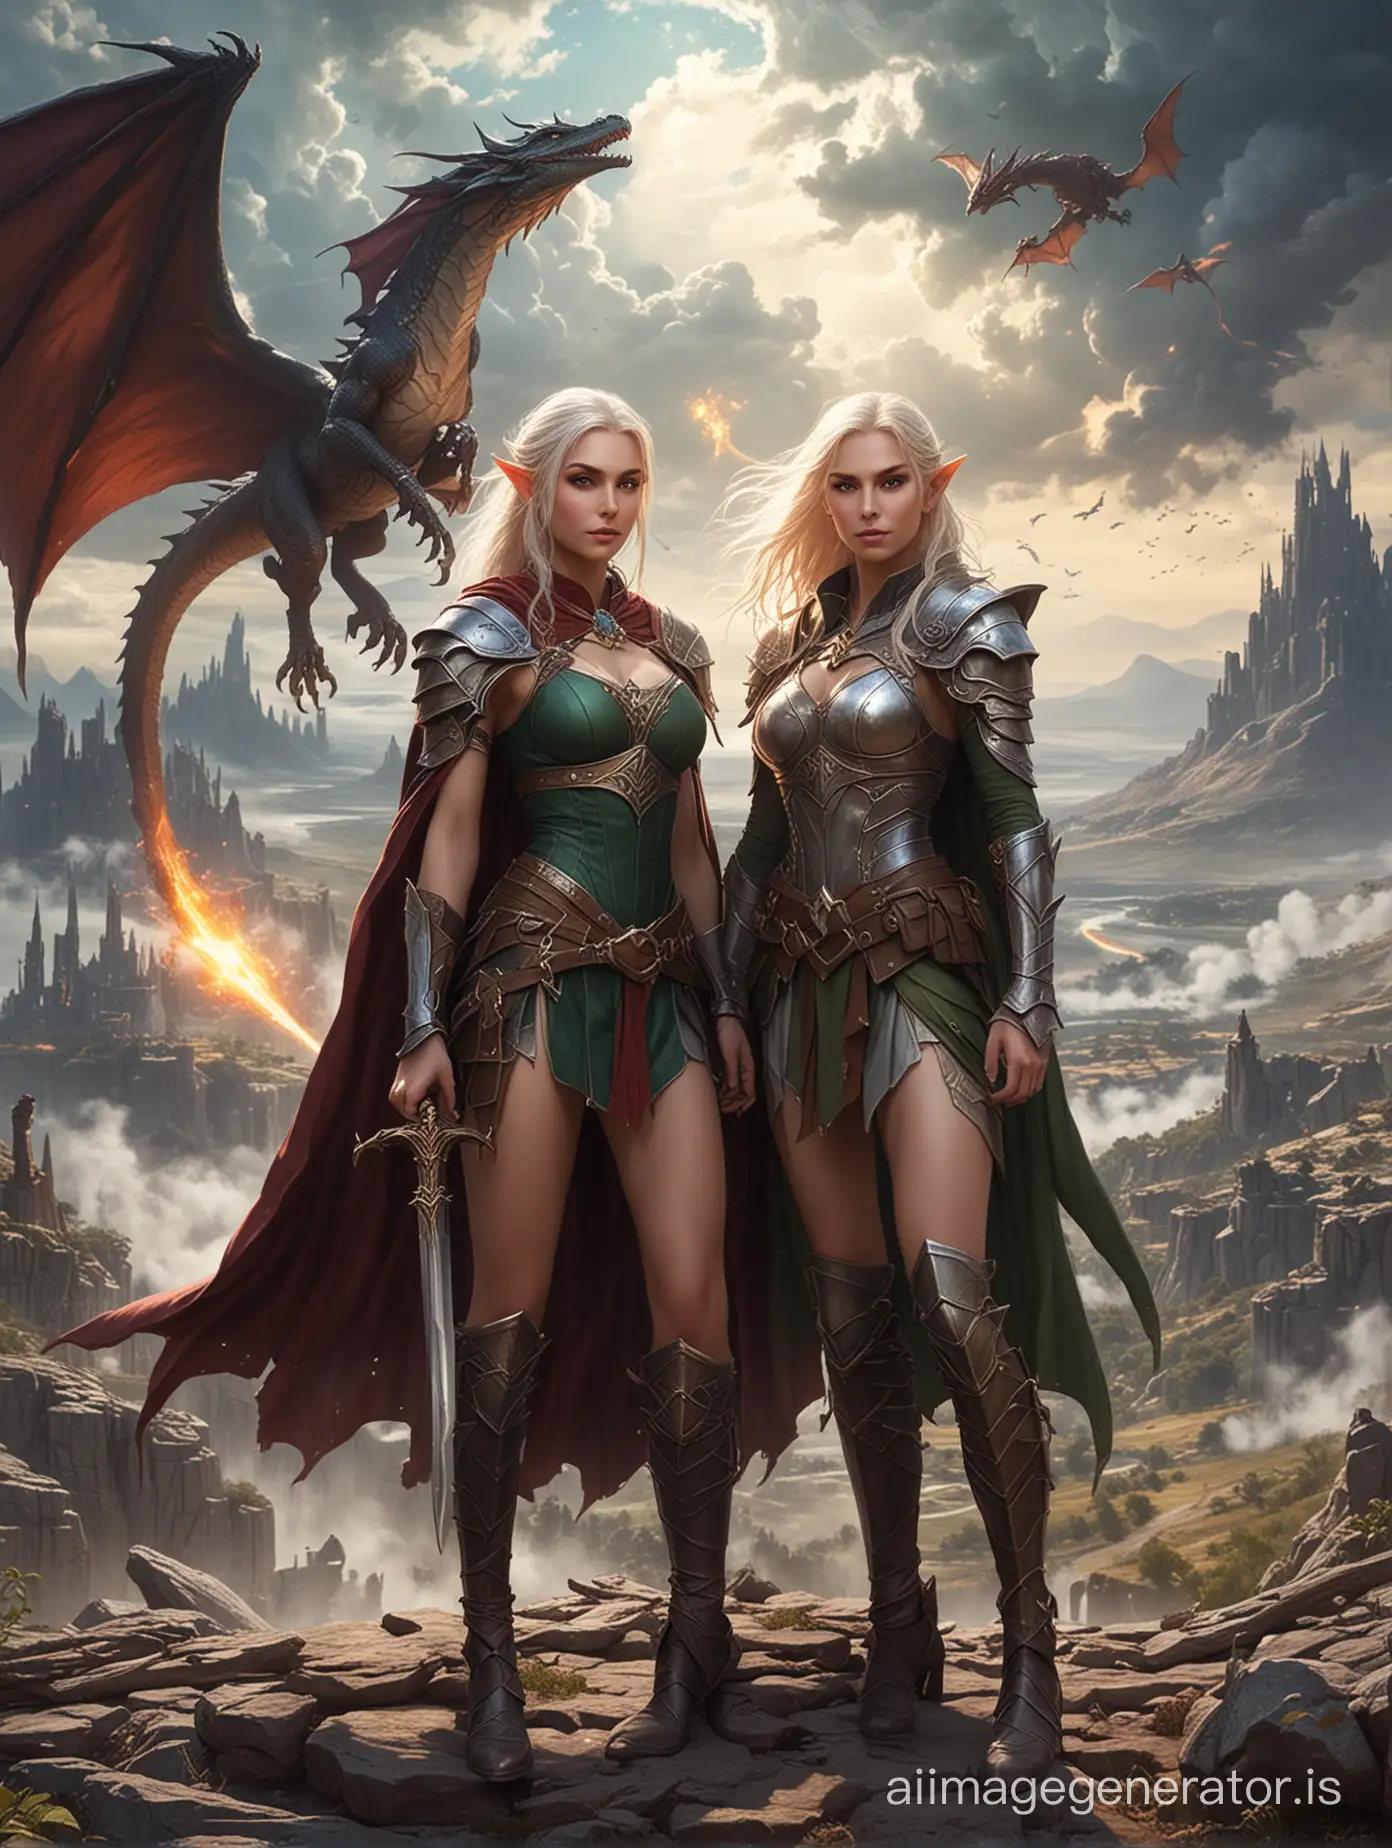 the female elven warrior and her female mage friend. Scantily dressed, fantasy setting. the battlefield behind them. no weapons. wizard wears a cape. dragon in the sky